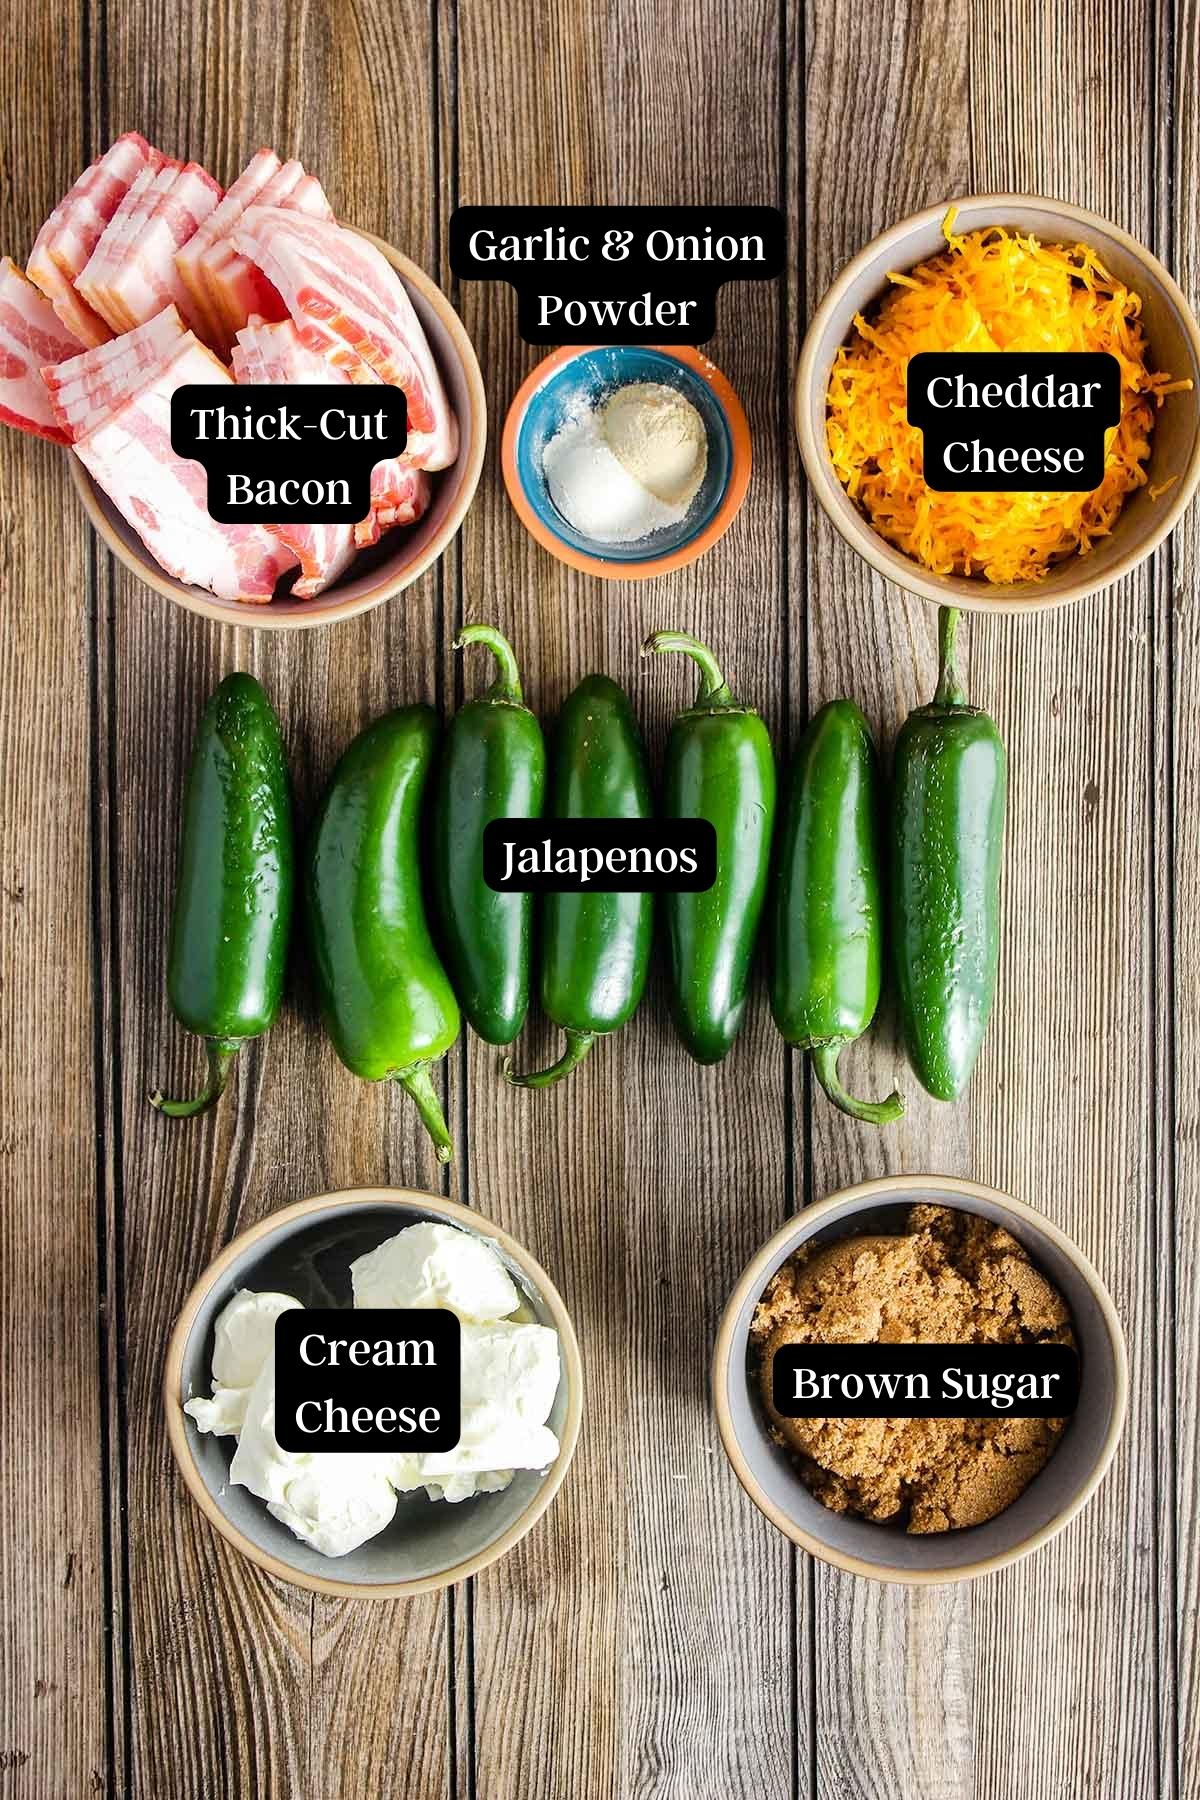 Ingredients for sweet and spicy jalapeno poppers (see recipe card).